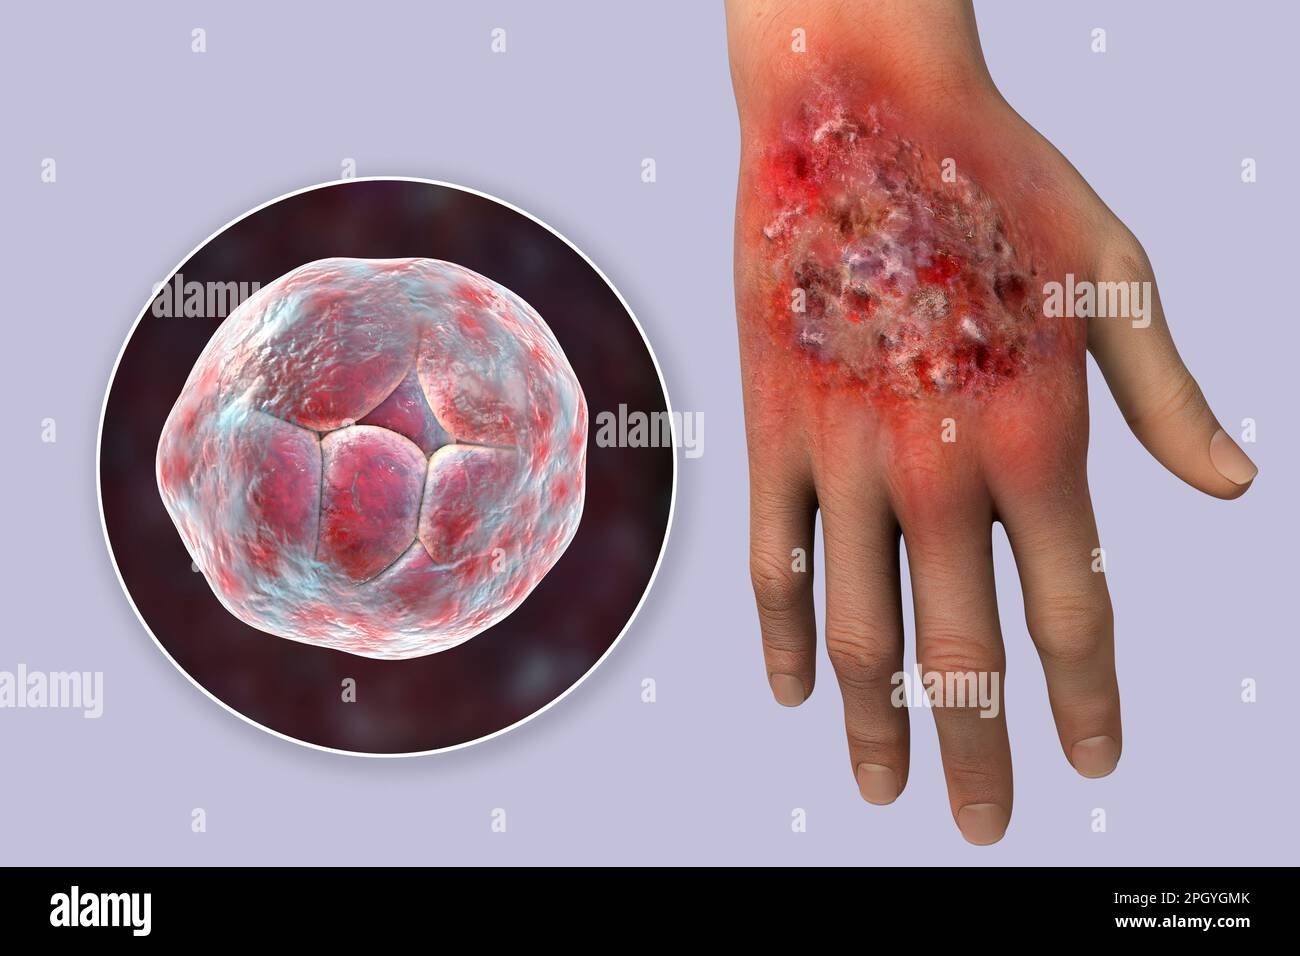 Protothecosis infection on a human hand, illustration Stock Photo